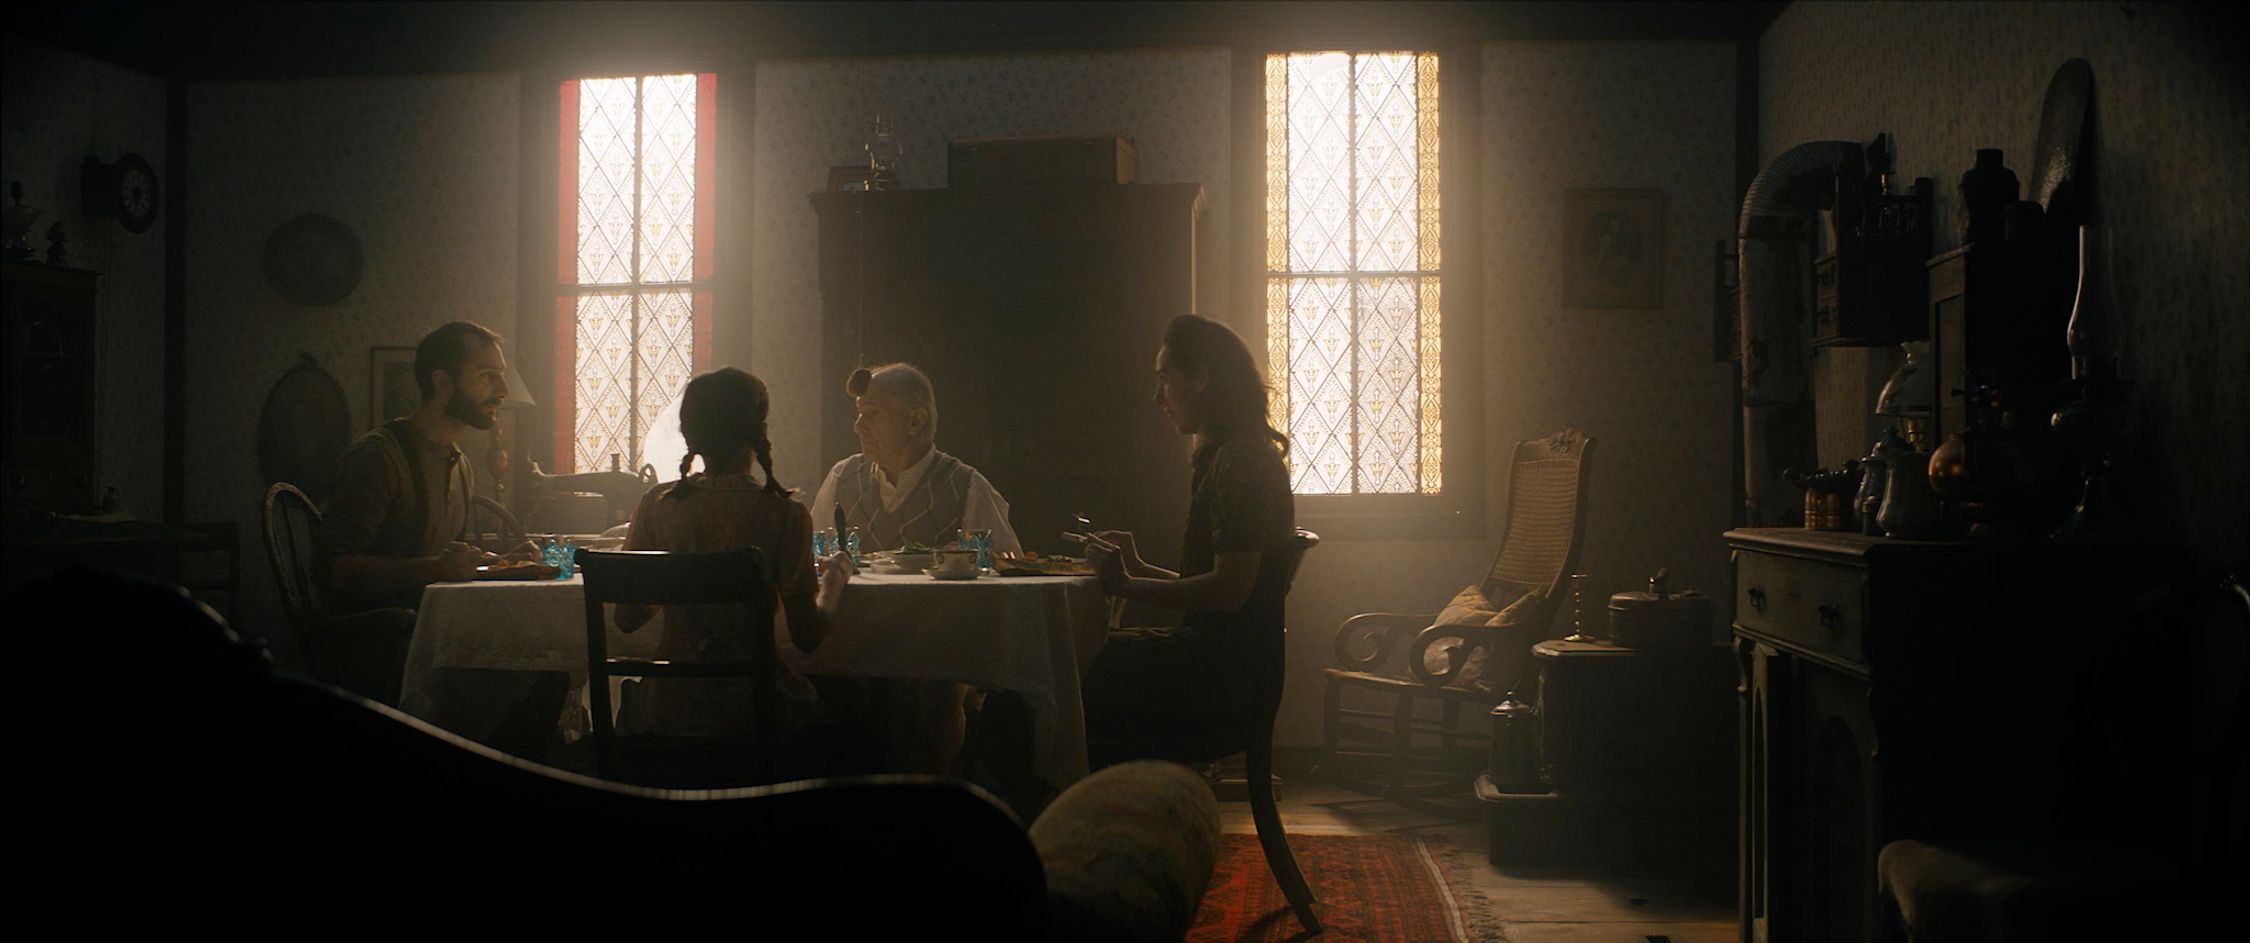 Four individuals are seated around a dining table in a dimly lit room that suggests a vintage or historical setting. The warm glow from the windows, adorned with patterned stained glass, provides natural light. The room is decorated with patterned wallpaper, and there are traditional furnishings and decorations, including a cabinet and a clock on the wall, which contribute to the room's old-fashioned ambiance. The scene has a calm and intimate feel, with the focus on the people at the table, possibly engaged in conversation over a meal.